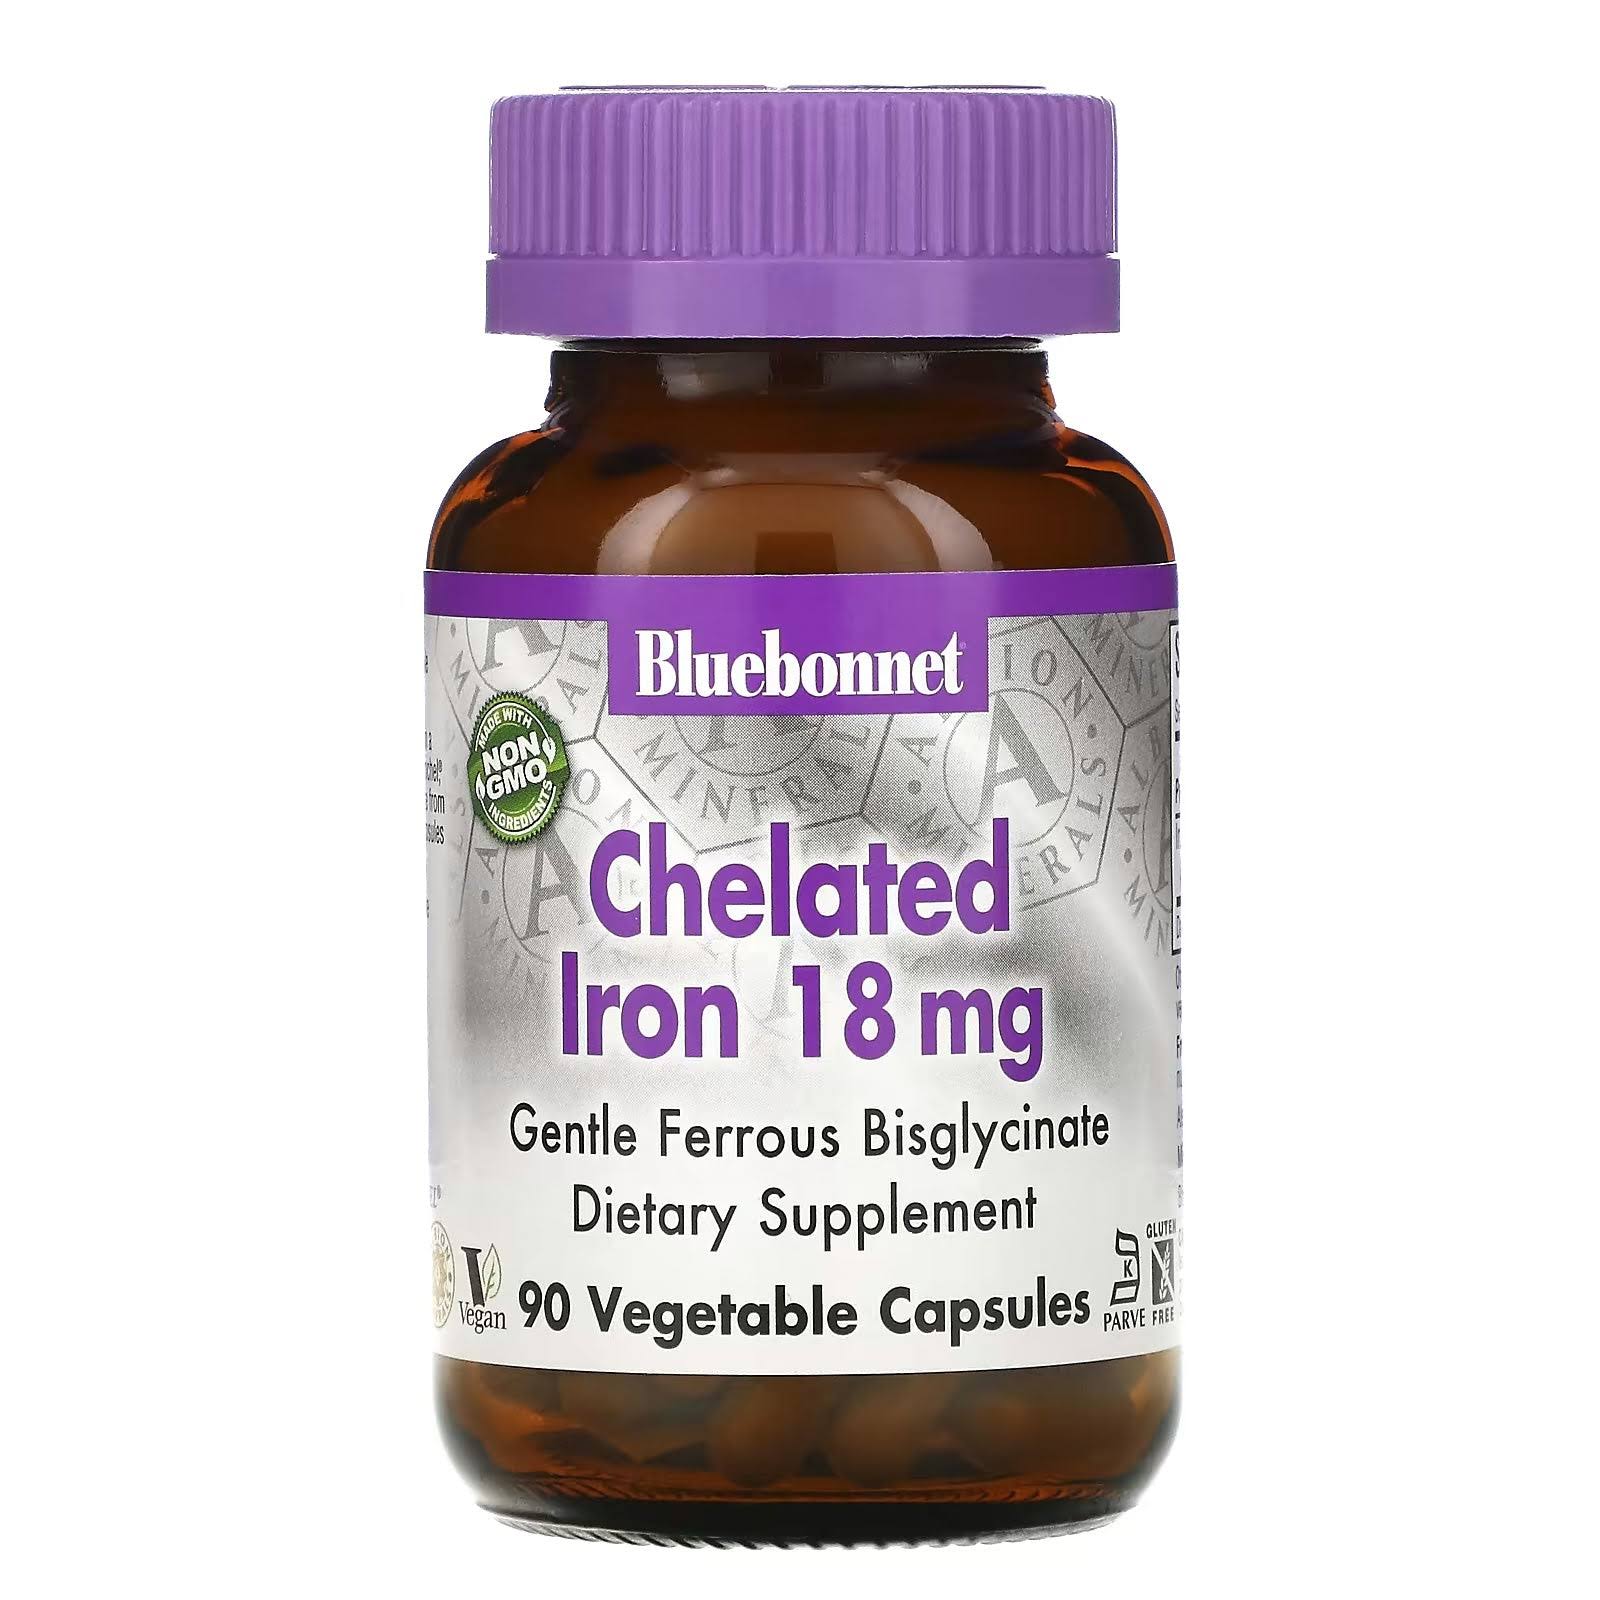 Bluebonnet Chelated Iron - 18mg, 90 Vcaps